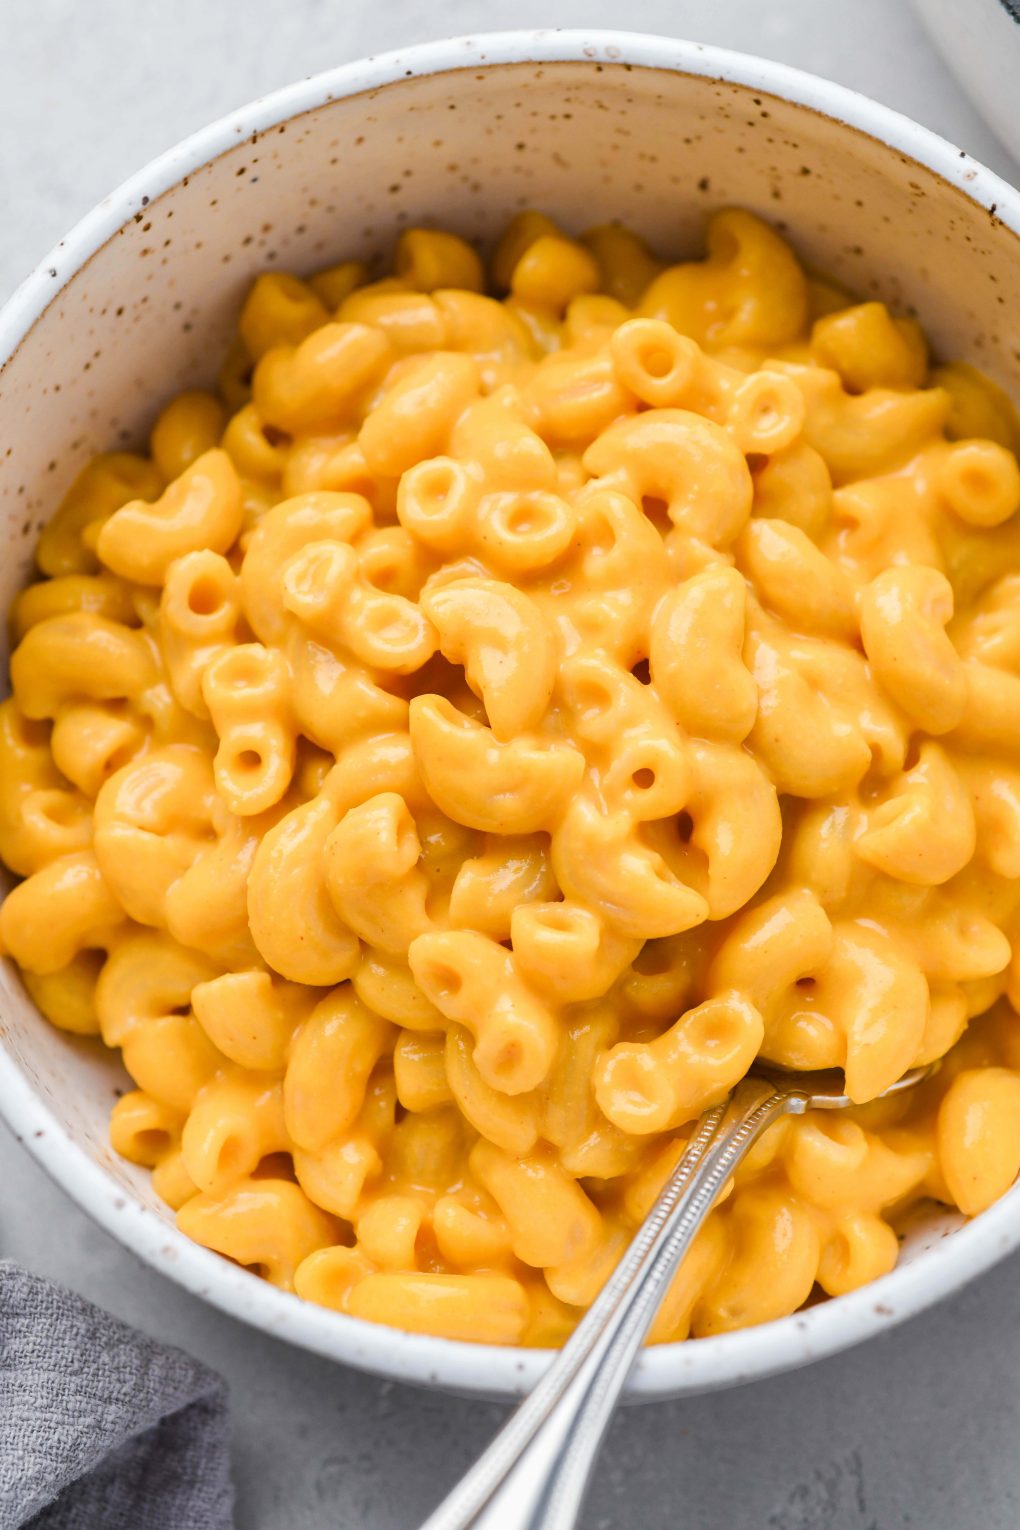 Close up image of a white speckled bowl filled with bright orange creamy vegan mac and cheese